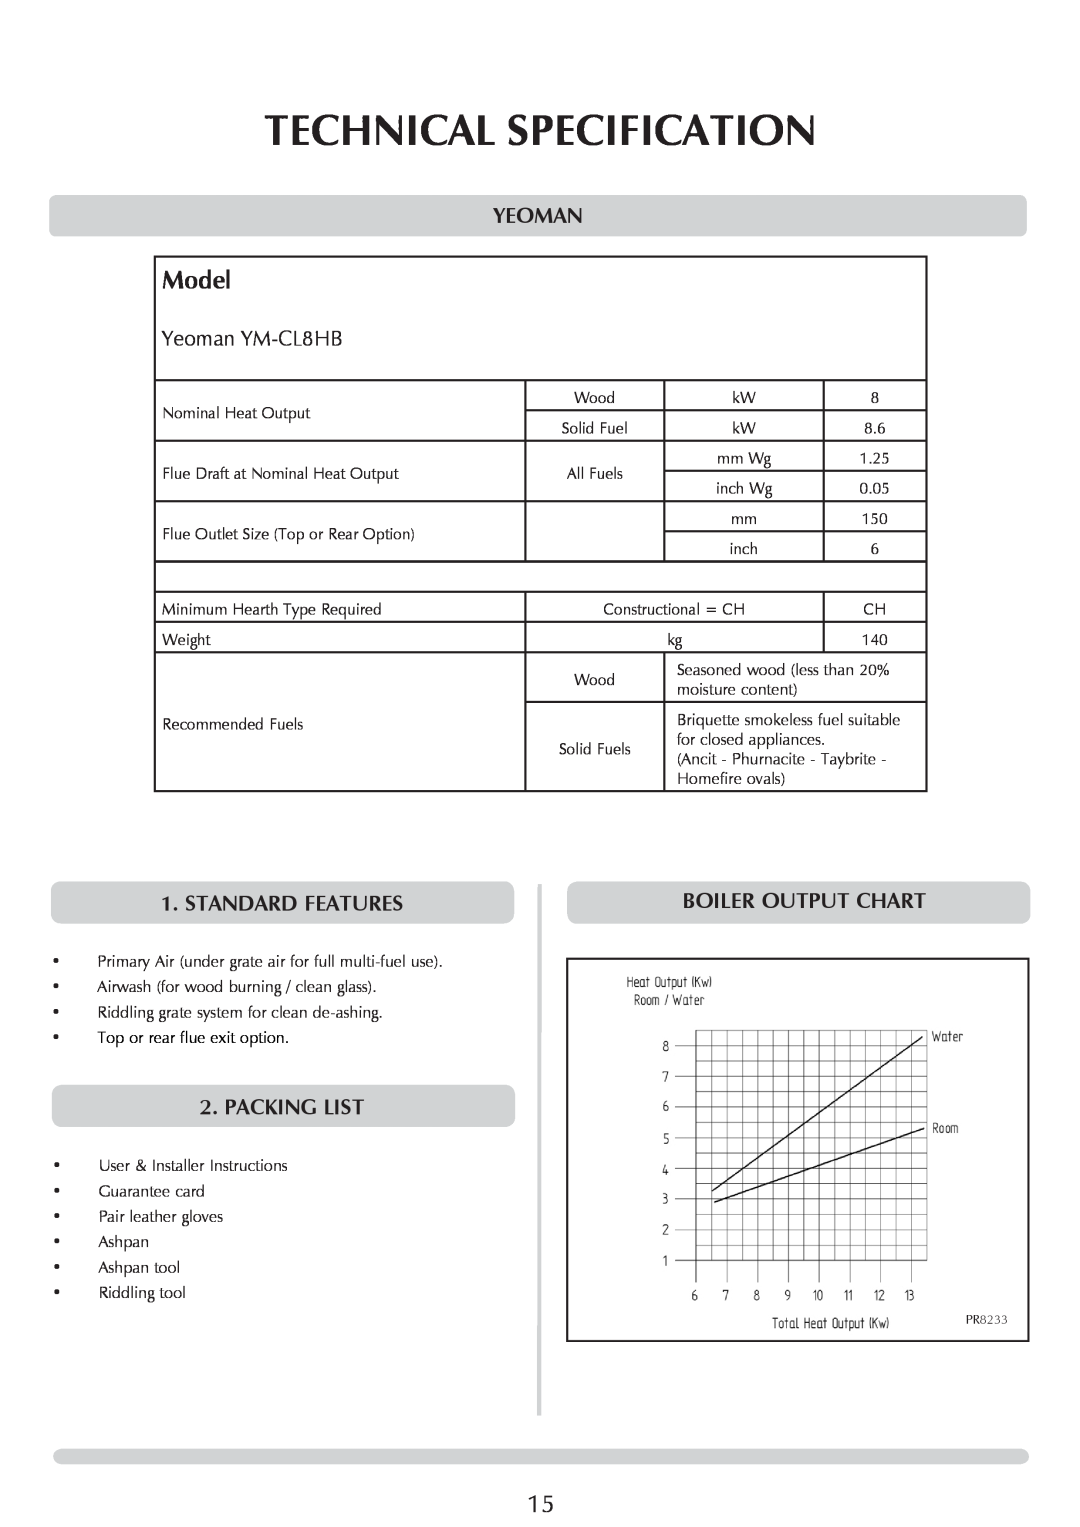 Yeoman manual Technical Specification, Model, Yeoman YM-CL8HB, Standard Features, Packing List, Boiler Output Chart 